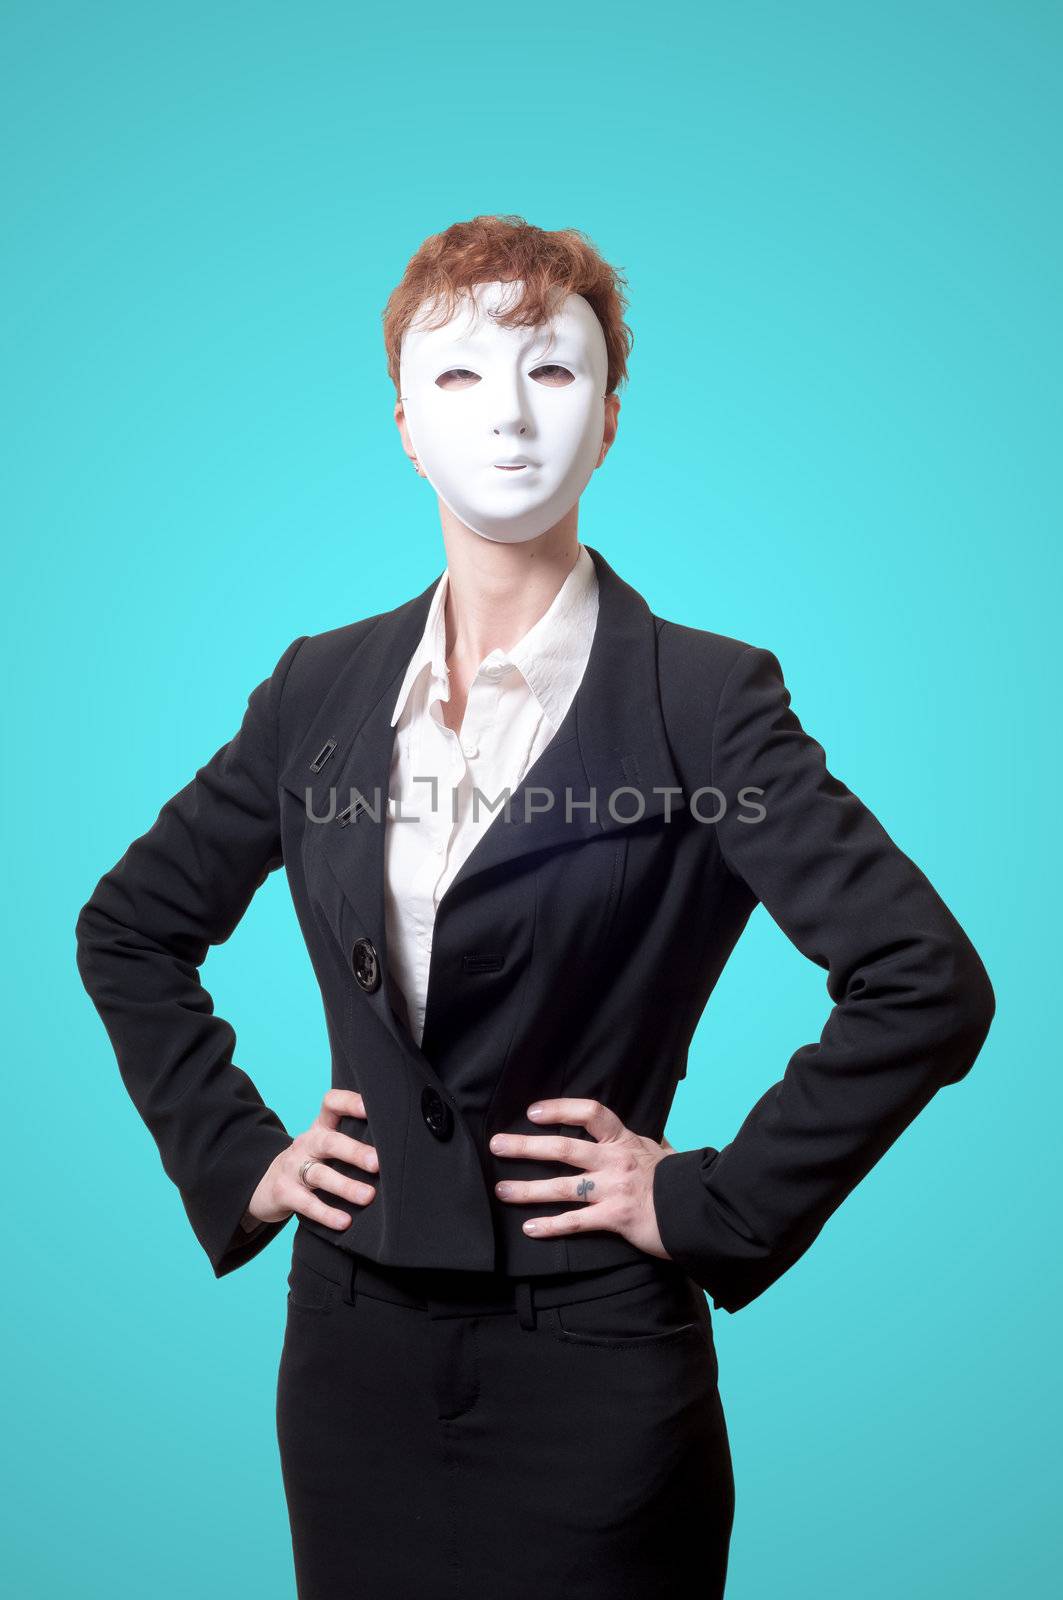 business woman with white mask on blue background